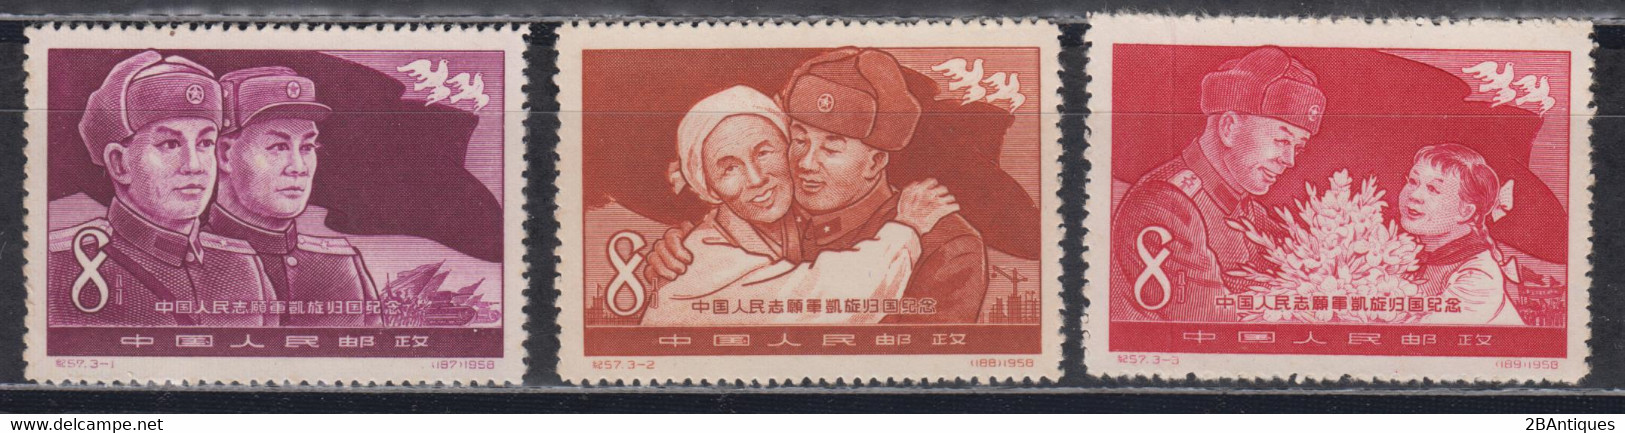 PR CHINA 1958 - Return Of Chinese People's Volunteers From Korea MNH** With Pre-print Paperfold ERROR! - Variedades Y Curiosidades